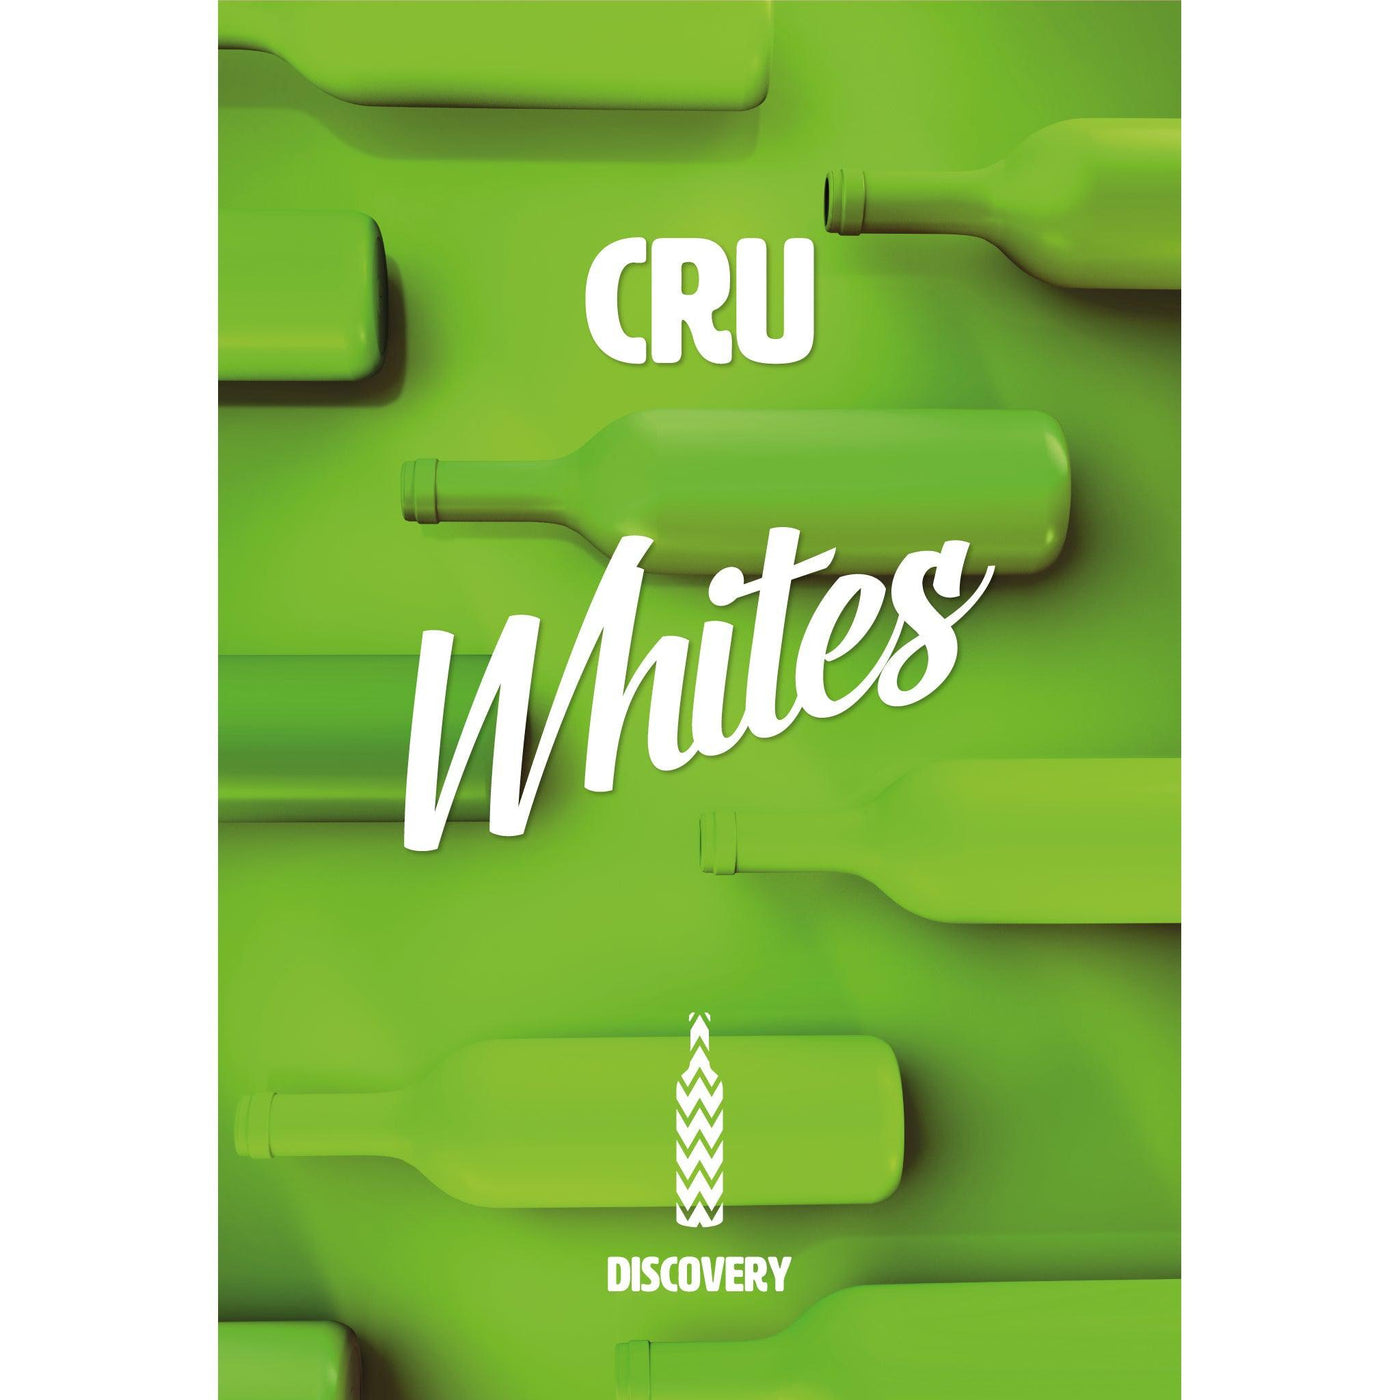 Discovery Cru Whites 6 Months